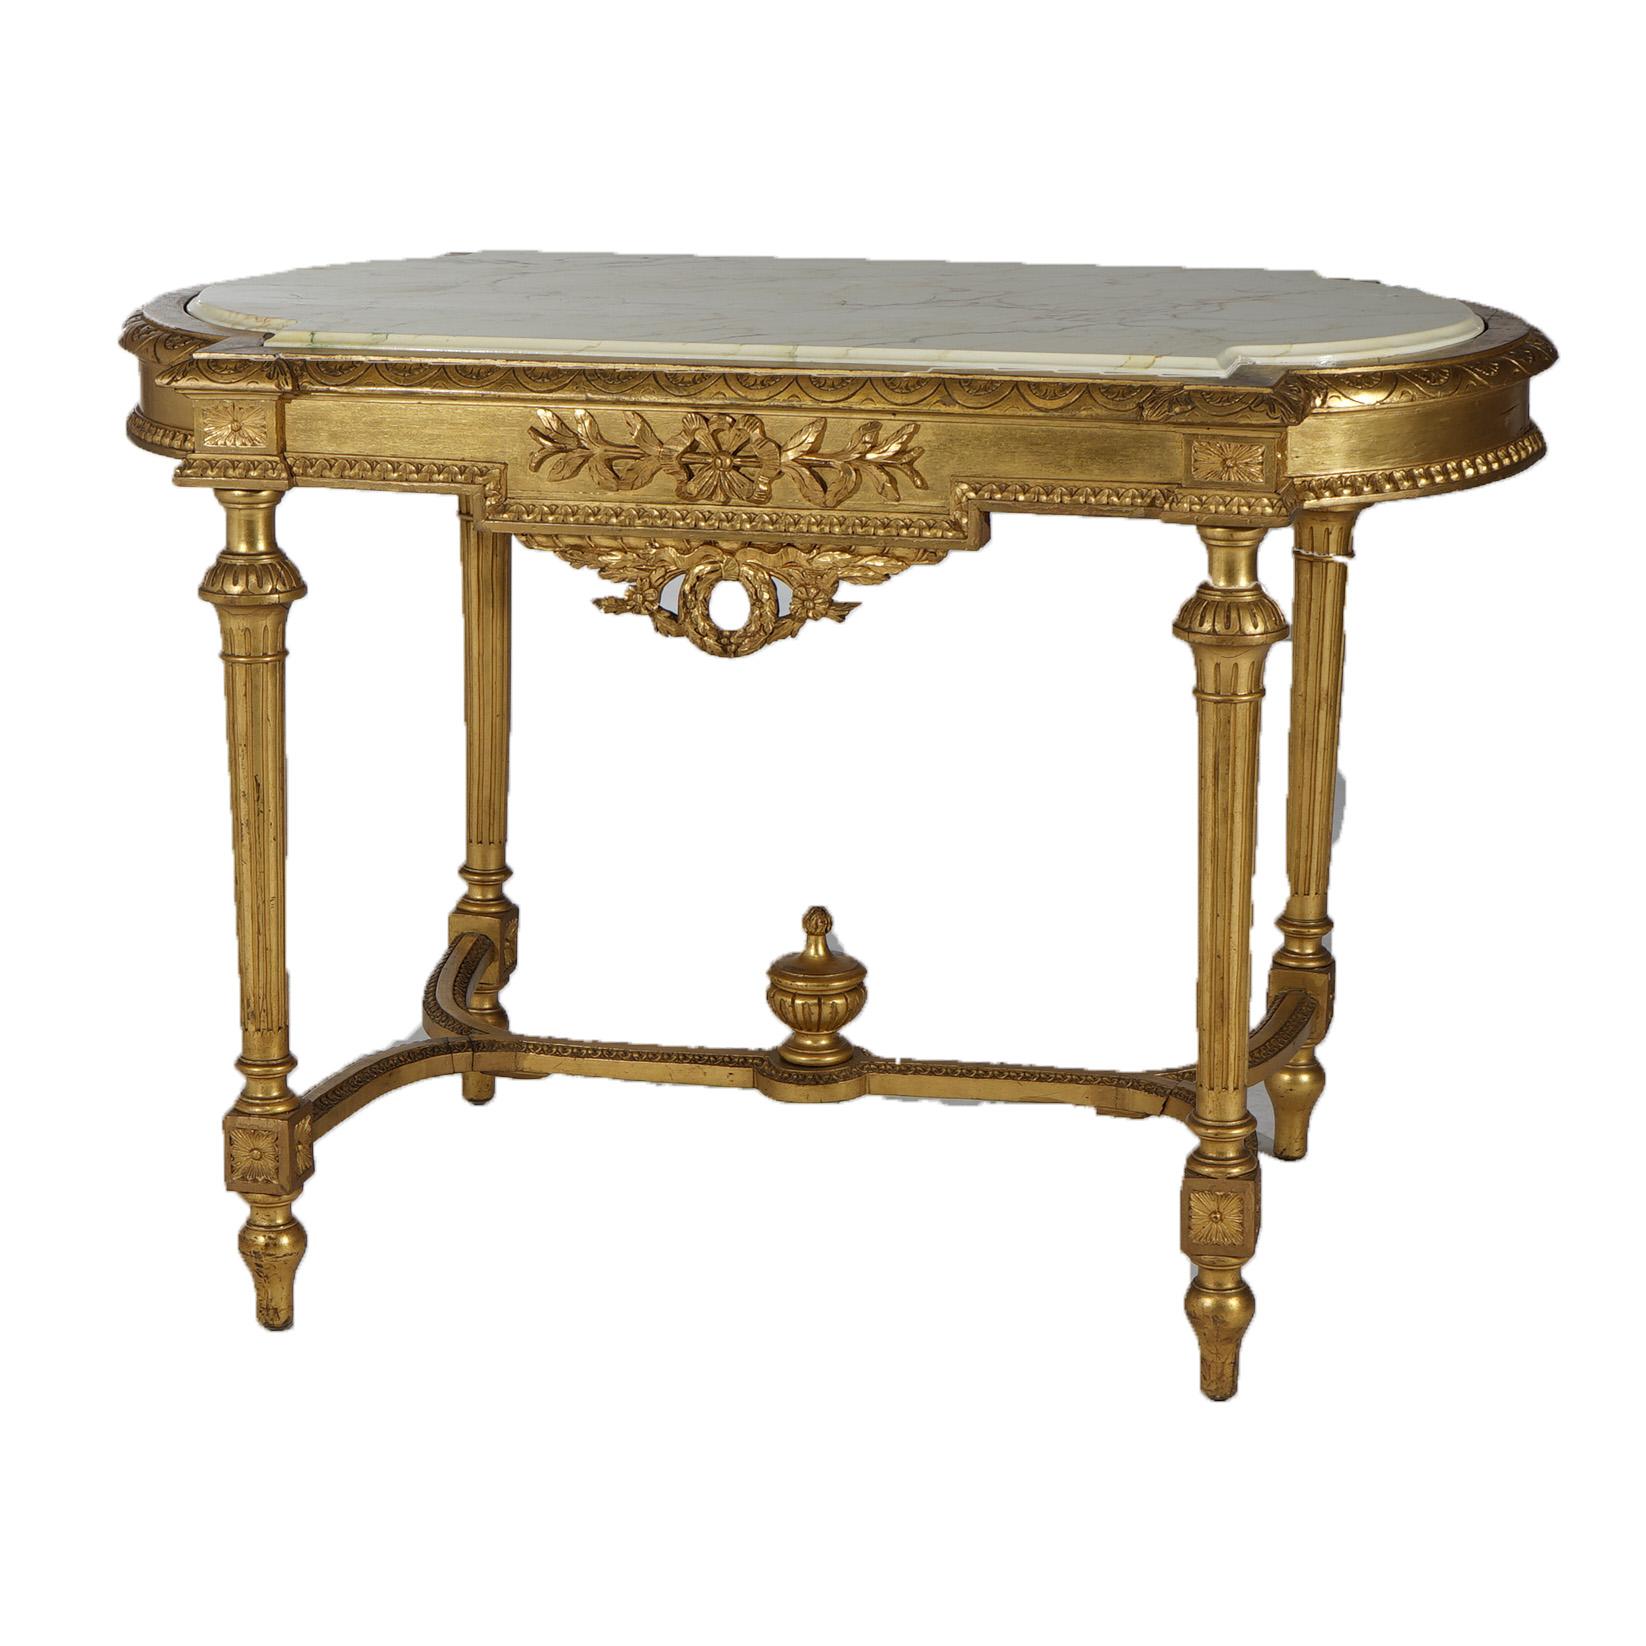 Antique French Louis XVI Style Giltwood Parlor Table with Faux Painted Top 19thC 14